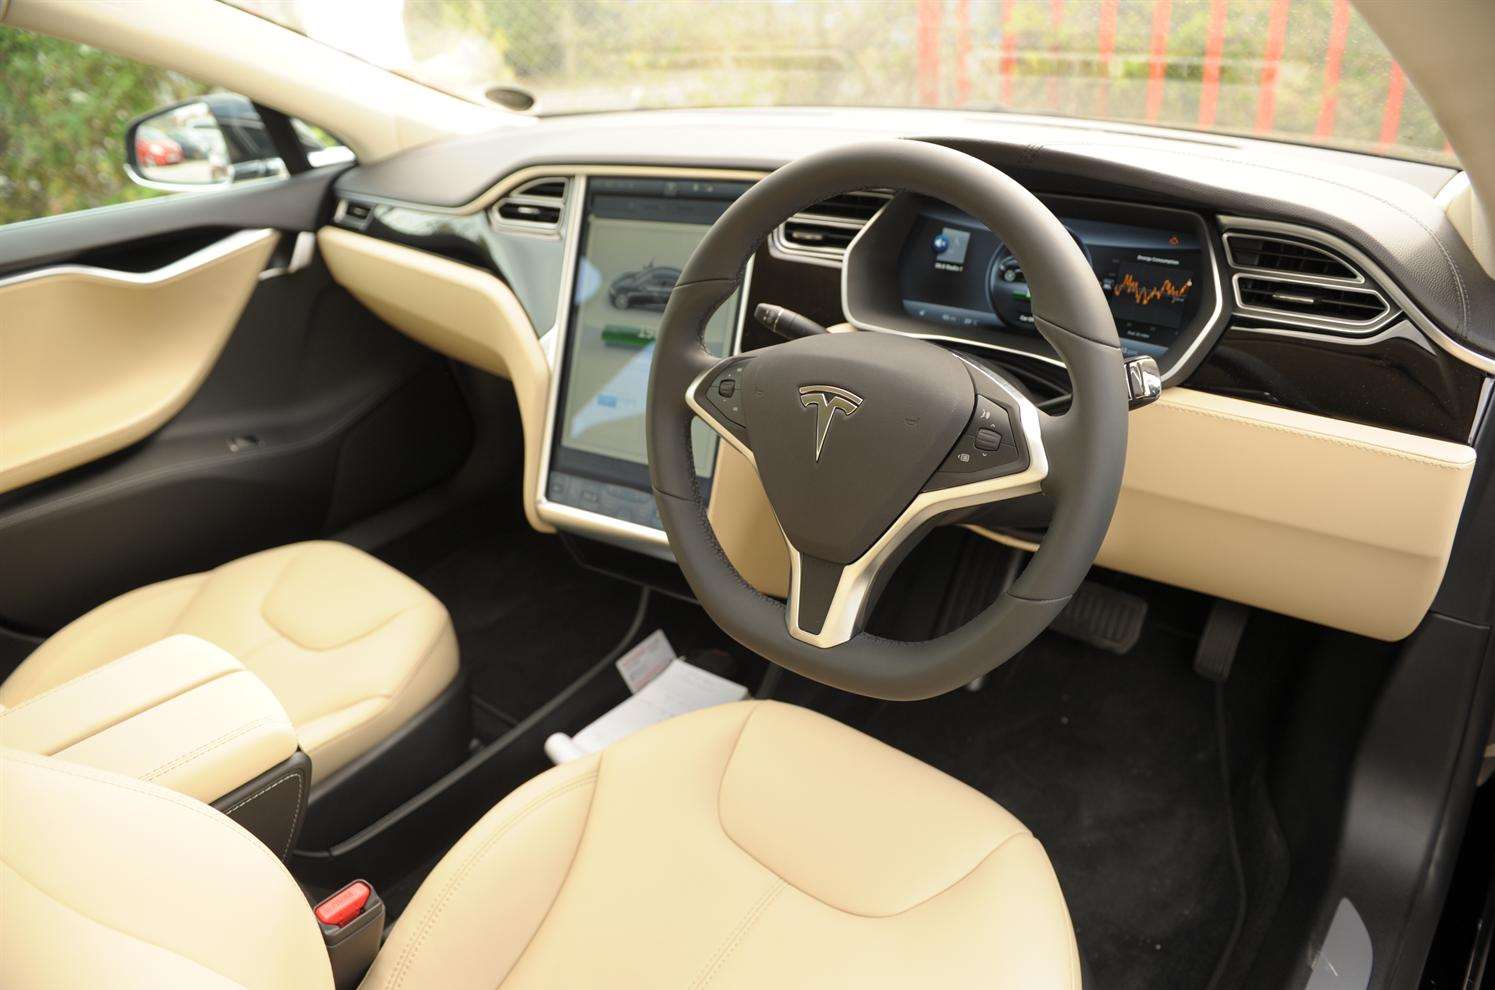 The car's interior is dominated by a 17-inch tablet screen that controls all the functions and includes an internet connection, sat nav and reversing cameras. Picture: Steve Crispe